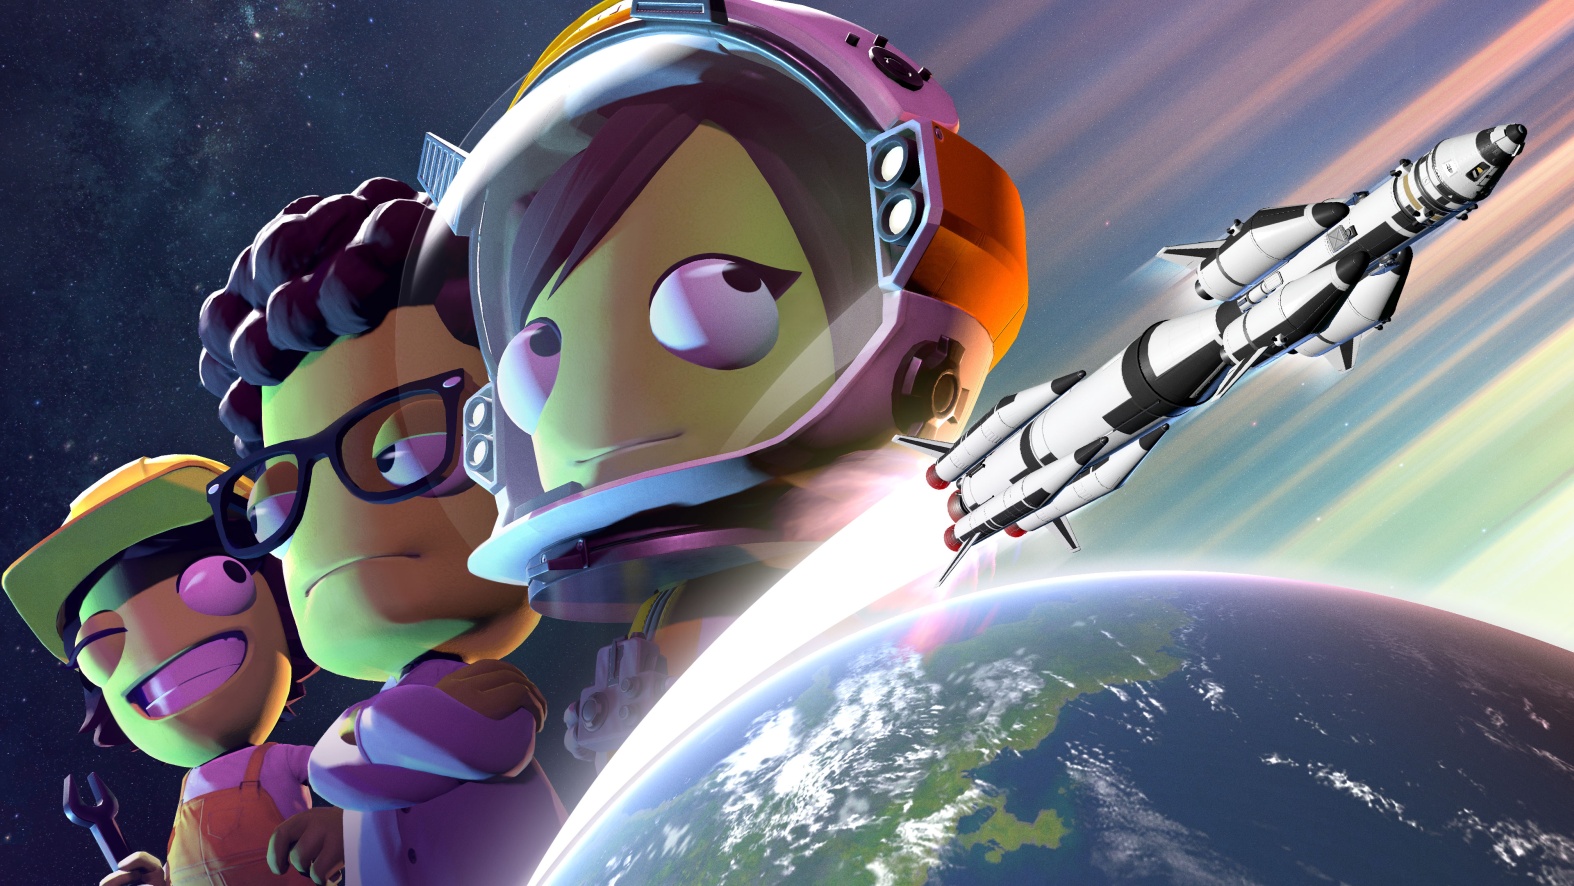 Kerbal Space Program 2 is preparing for a successful Steam launch